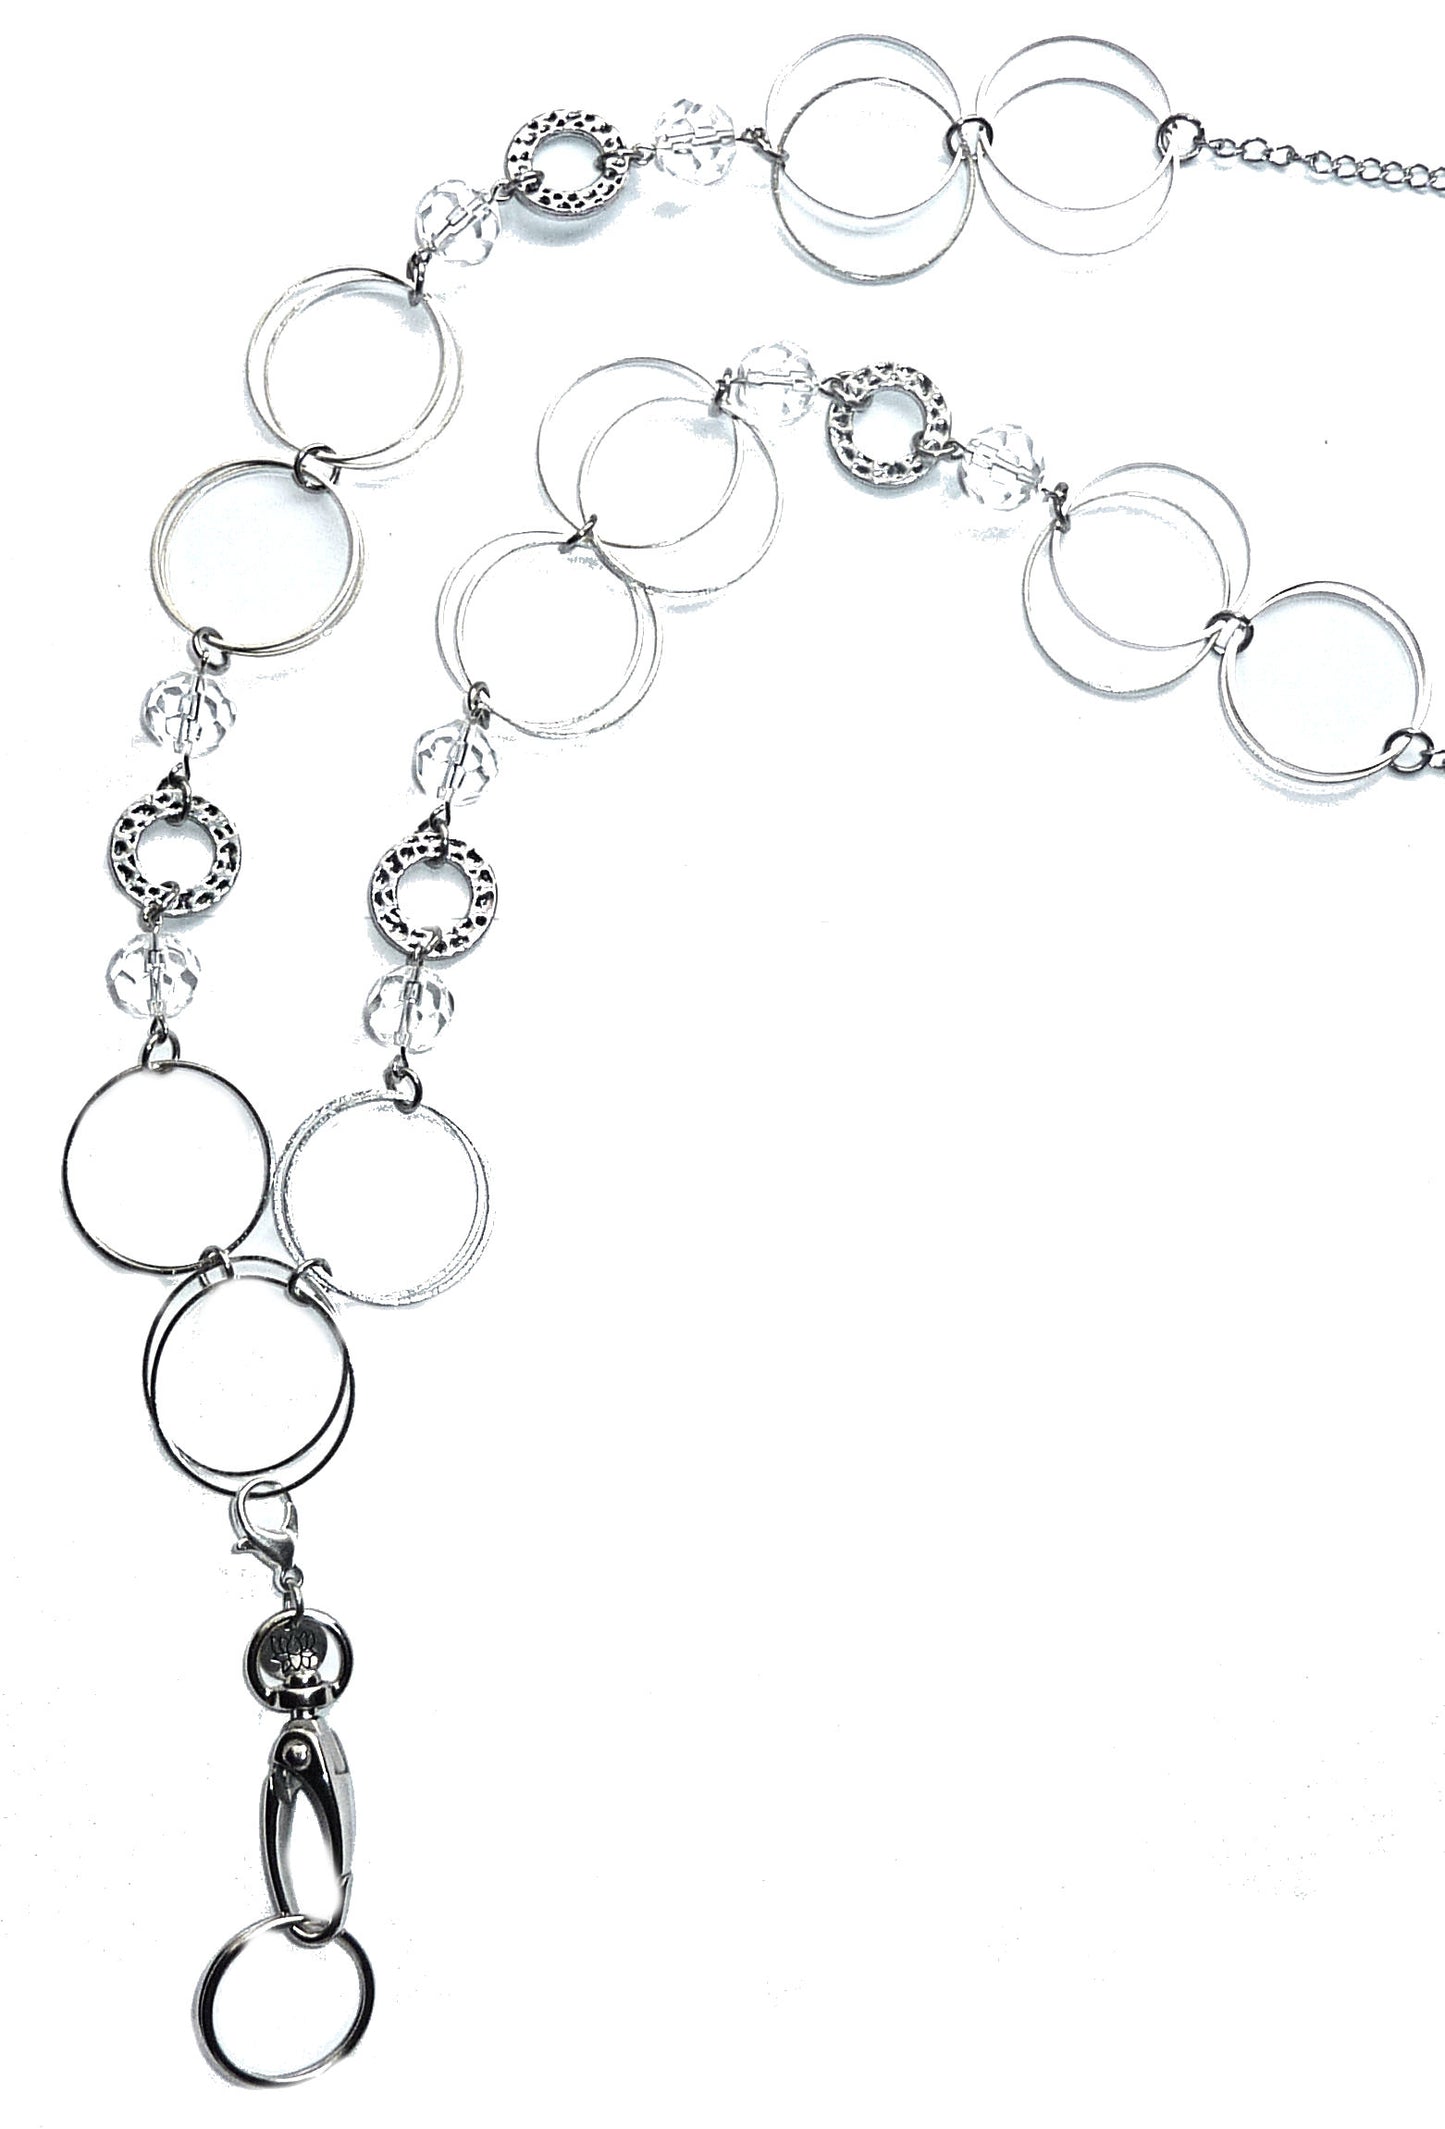 Pack of 3 of Women's Fashion Jewelry Necklace Lanyard - Best Sellers- Magnetic Breakaway